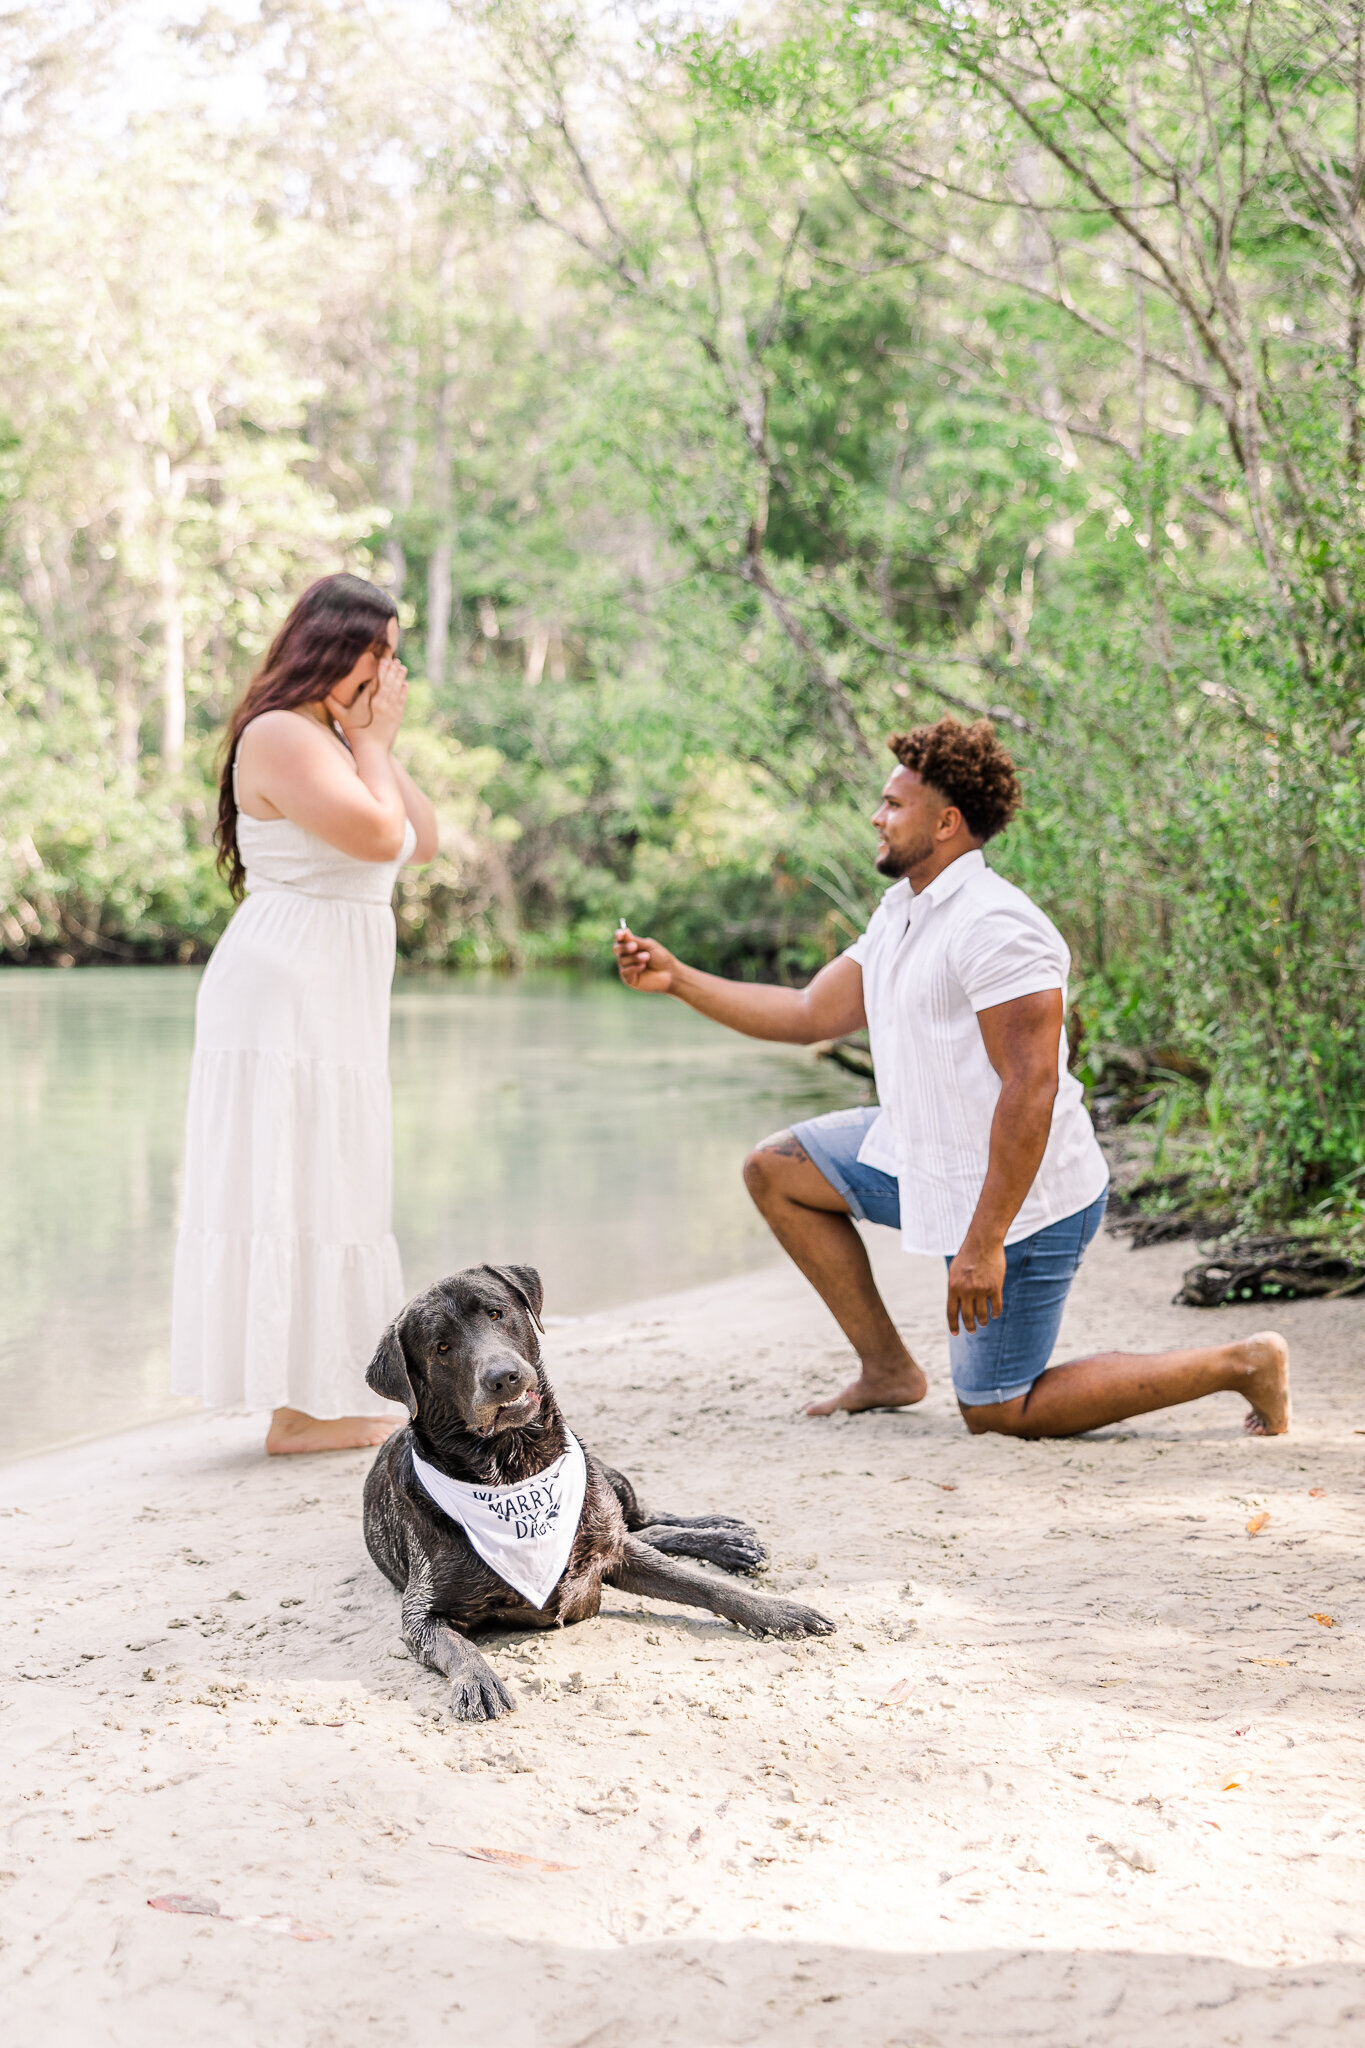 A man proposes to a woman on a small beach while a dog looks at the camera